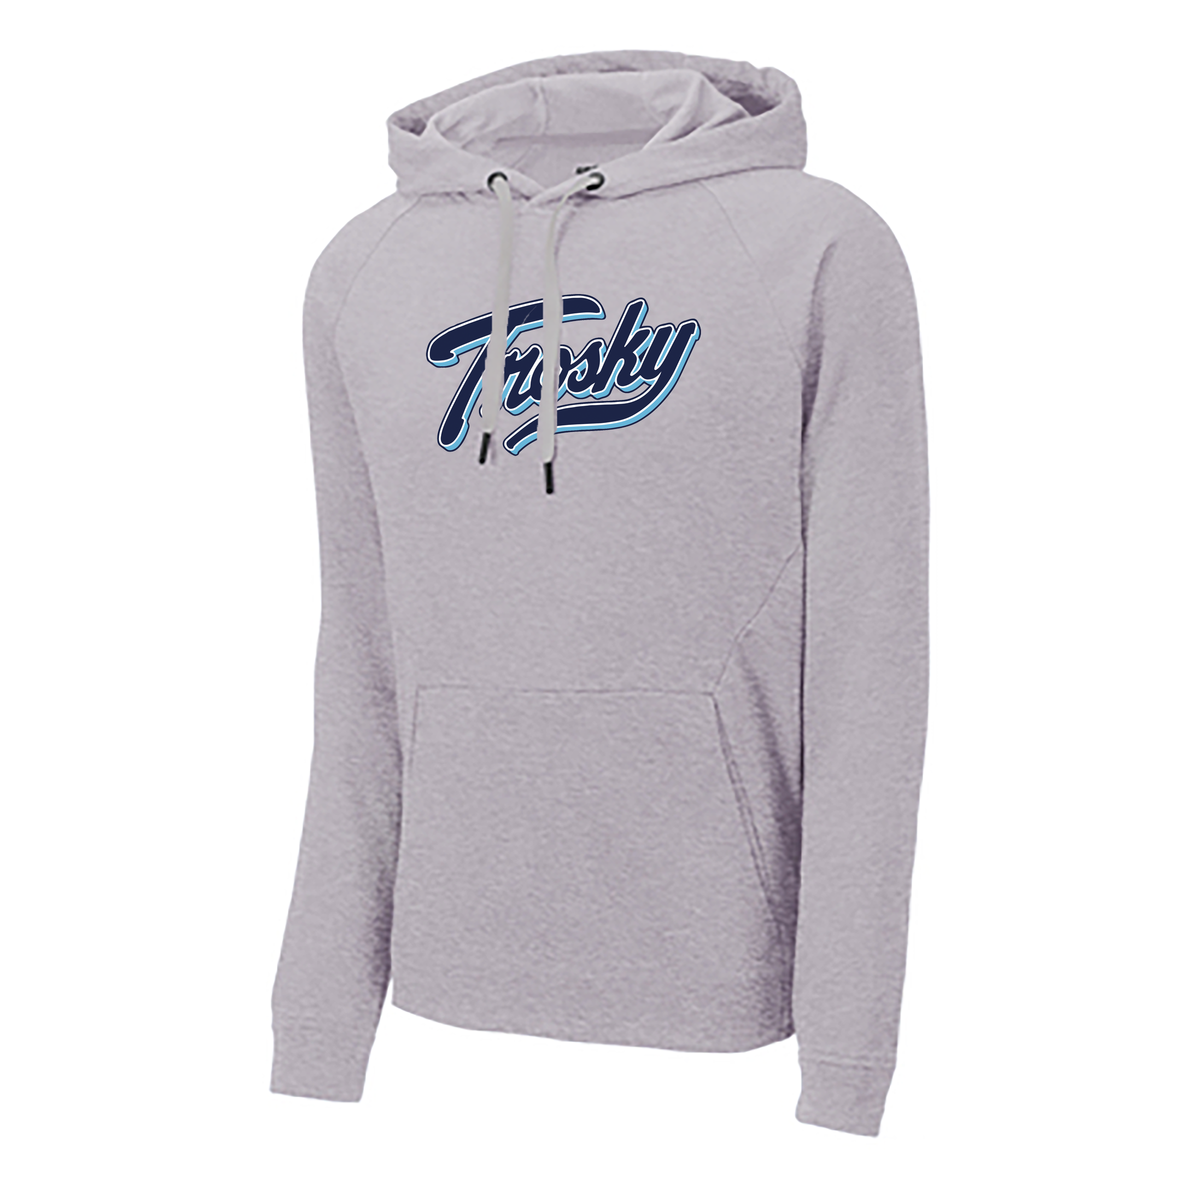 Trosky Baseball Lightweight French Terry Pullover Hoodie